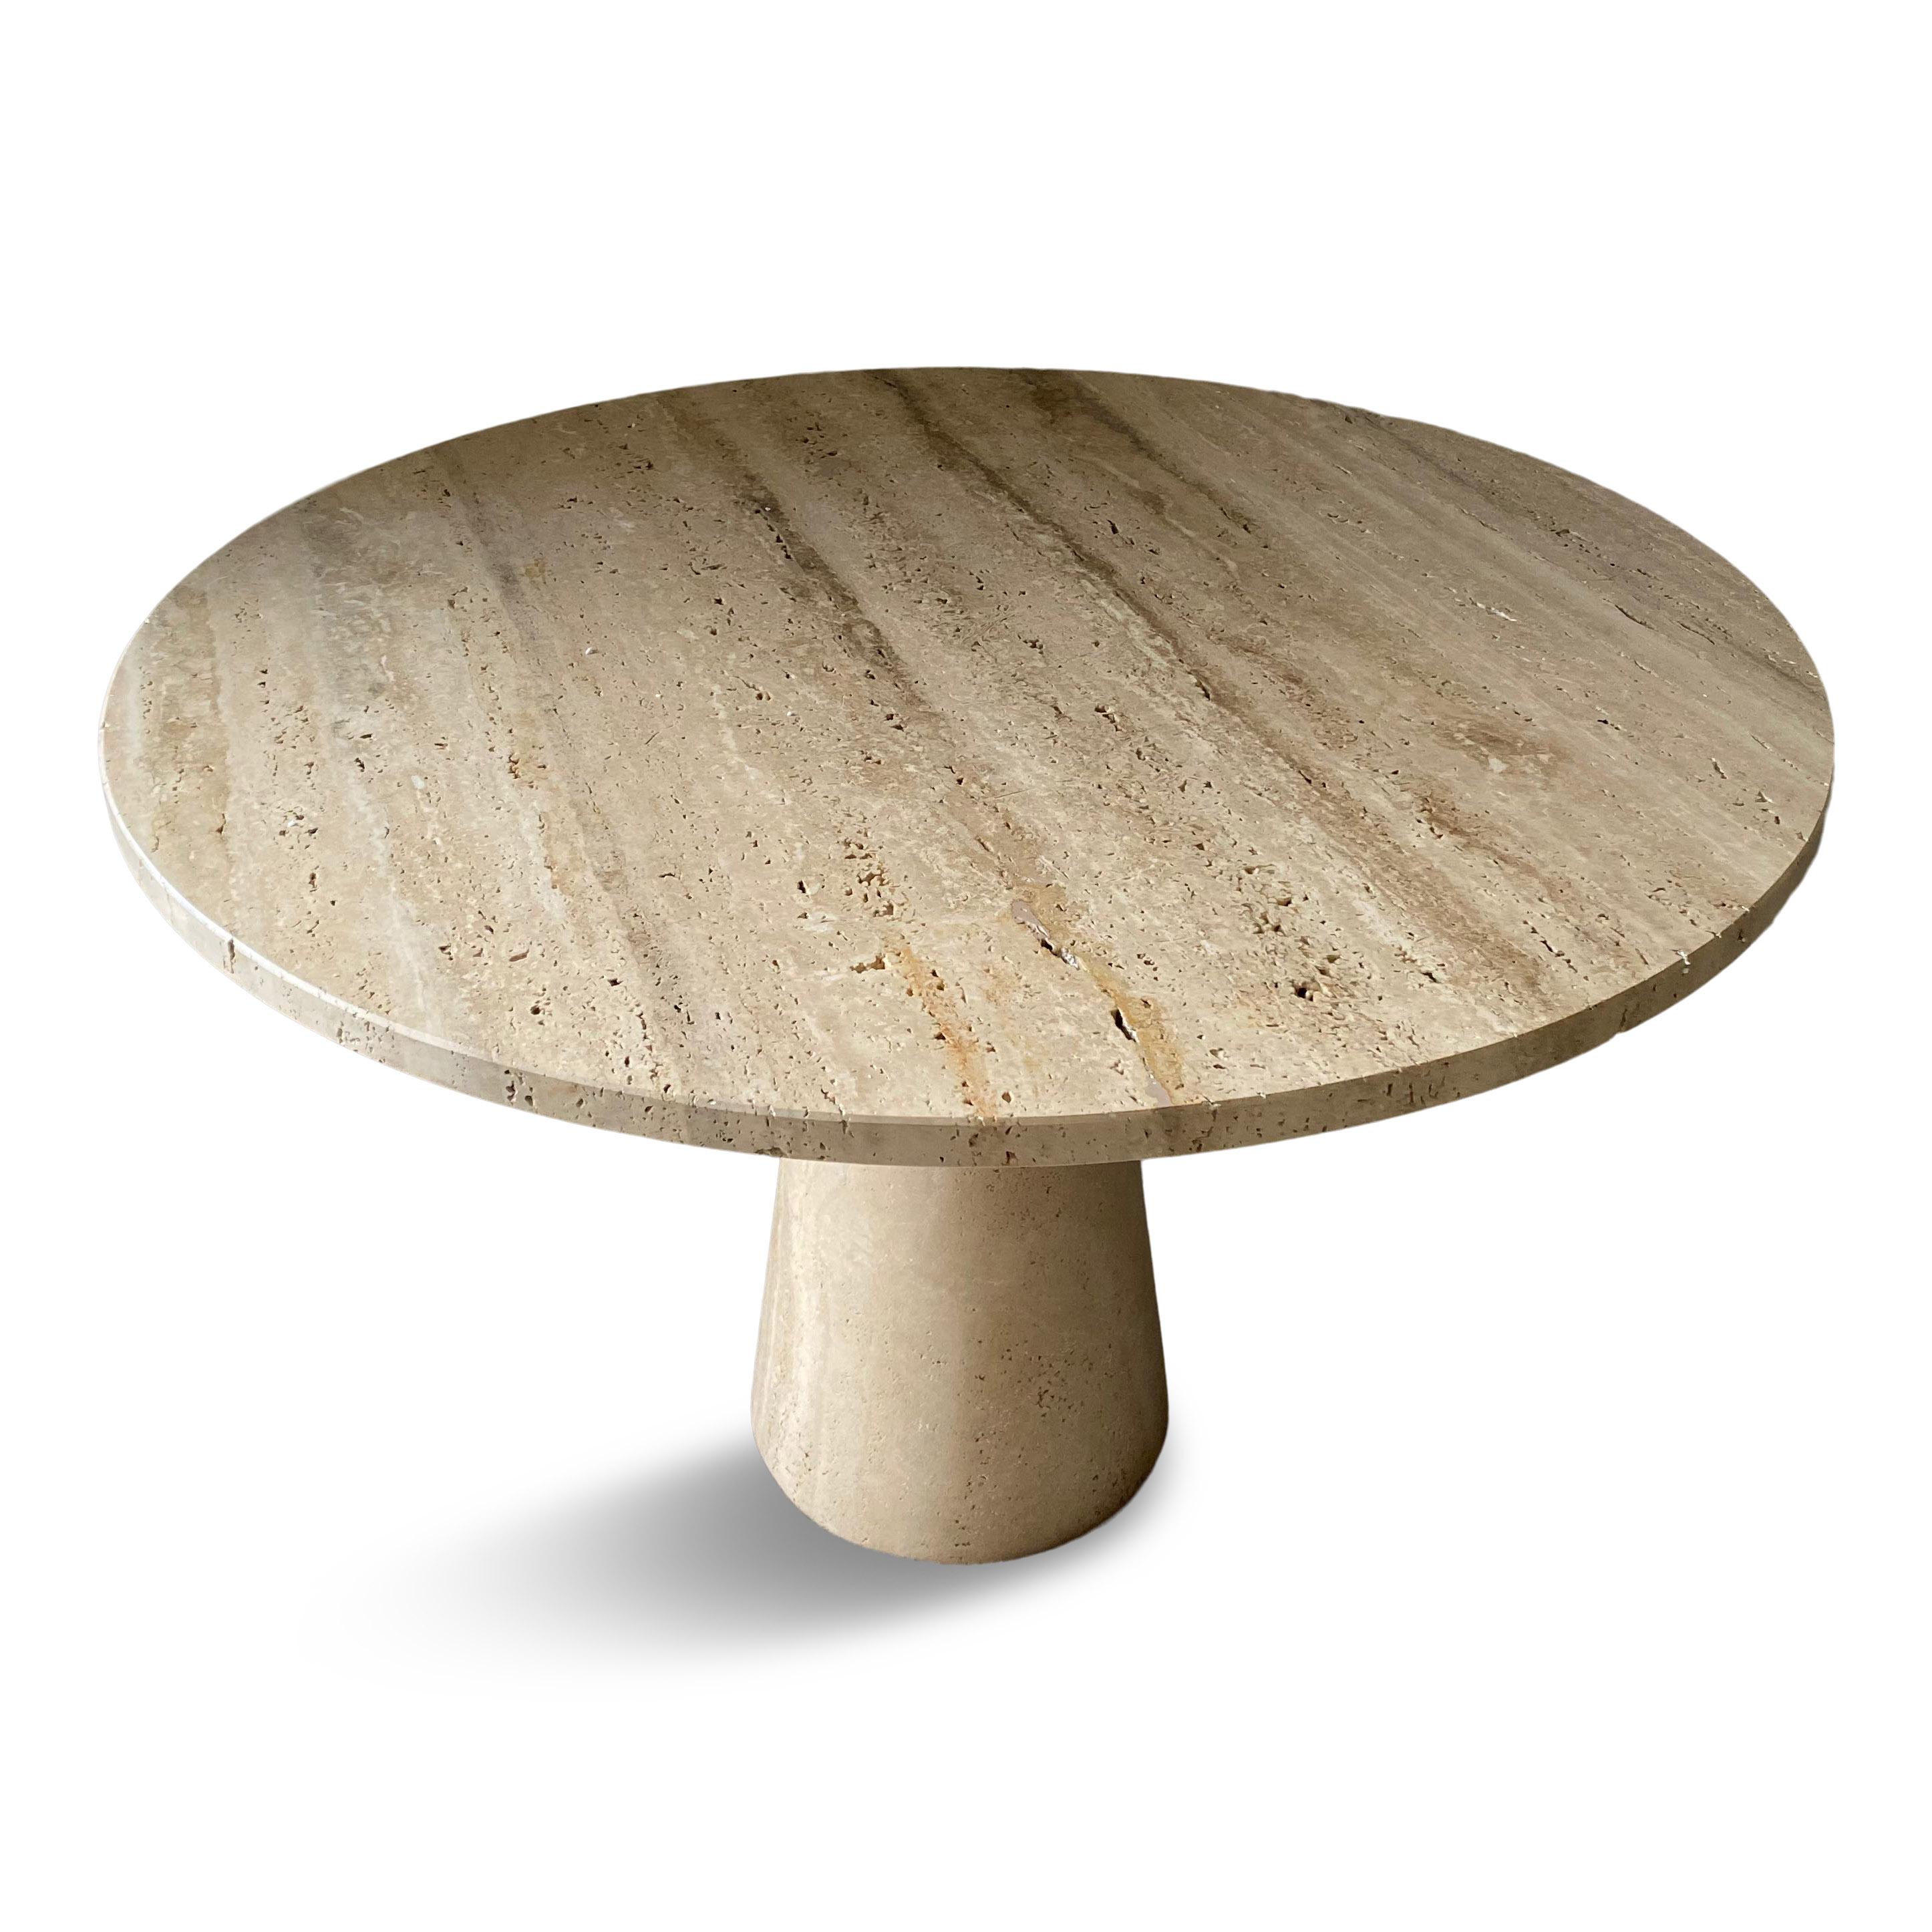 Travertine dining table

Made to order in Italy

Round top

Honed or polished finish

Rounded or straight edges

Travertine pedestal

Photos show recently made tables. The stone used will be similar colour and grain.

The table can be made in other